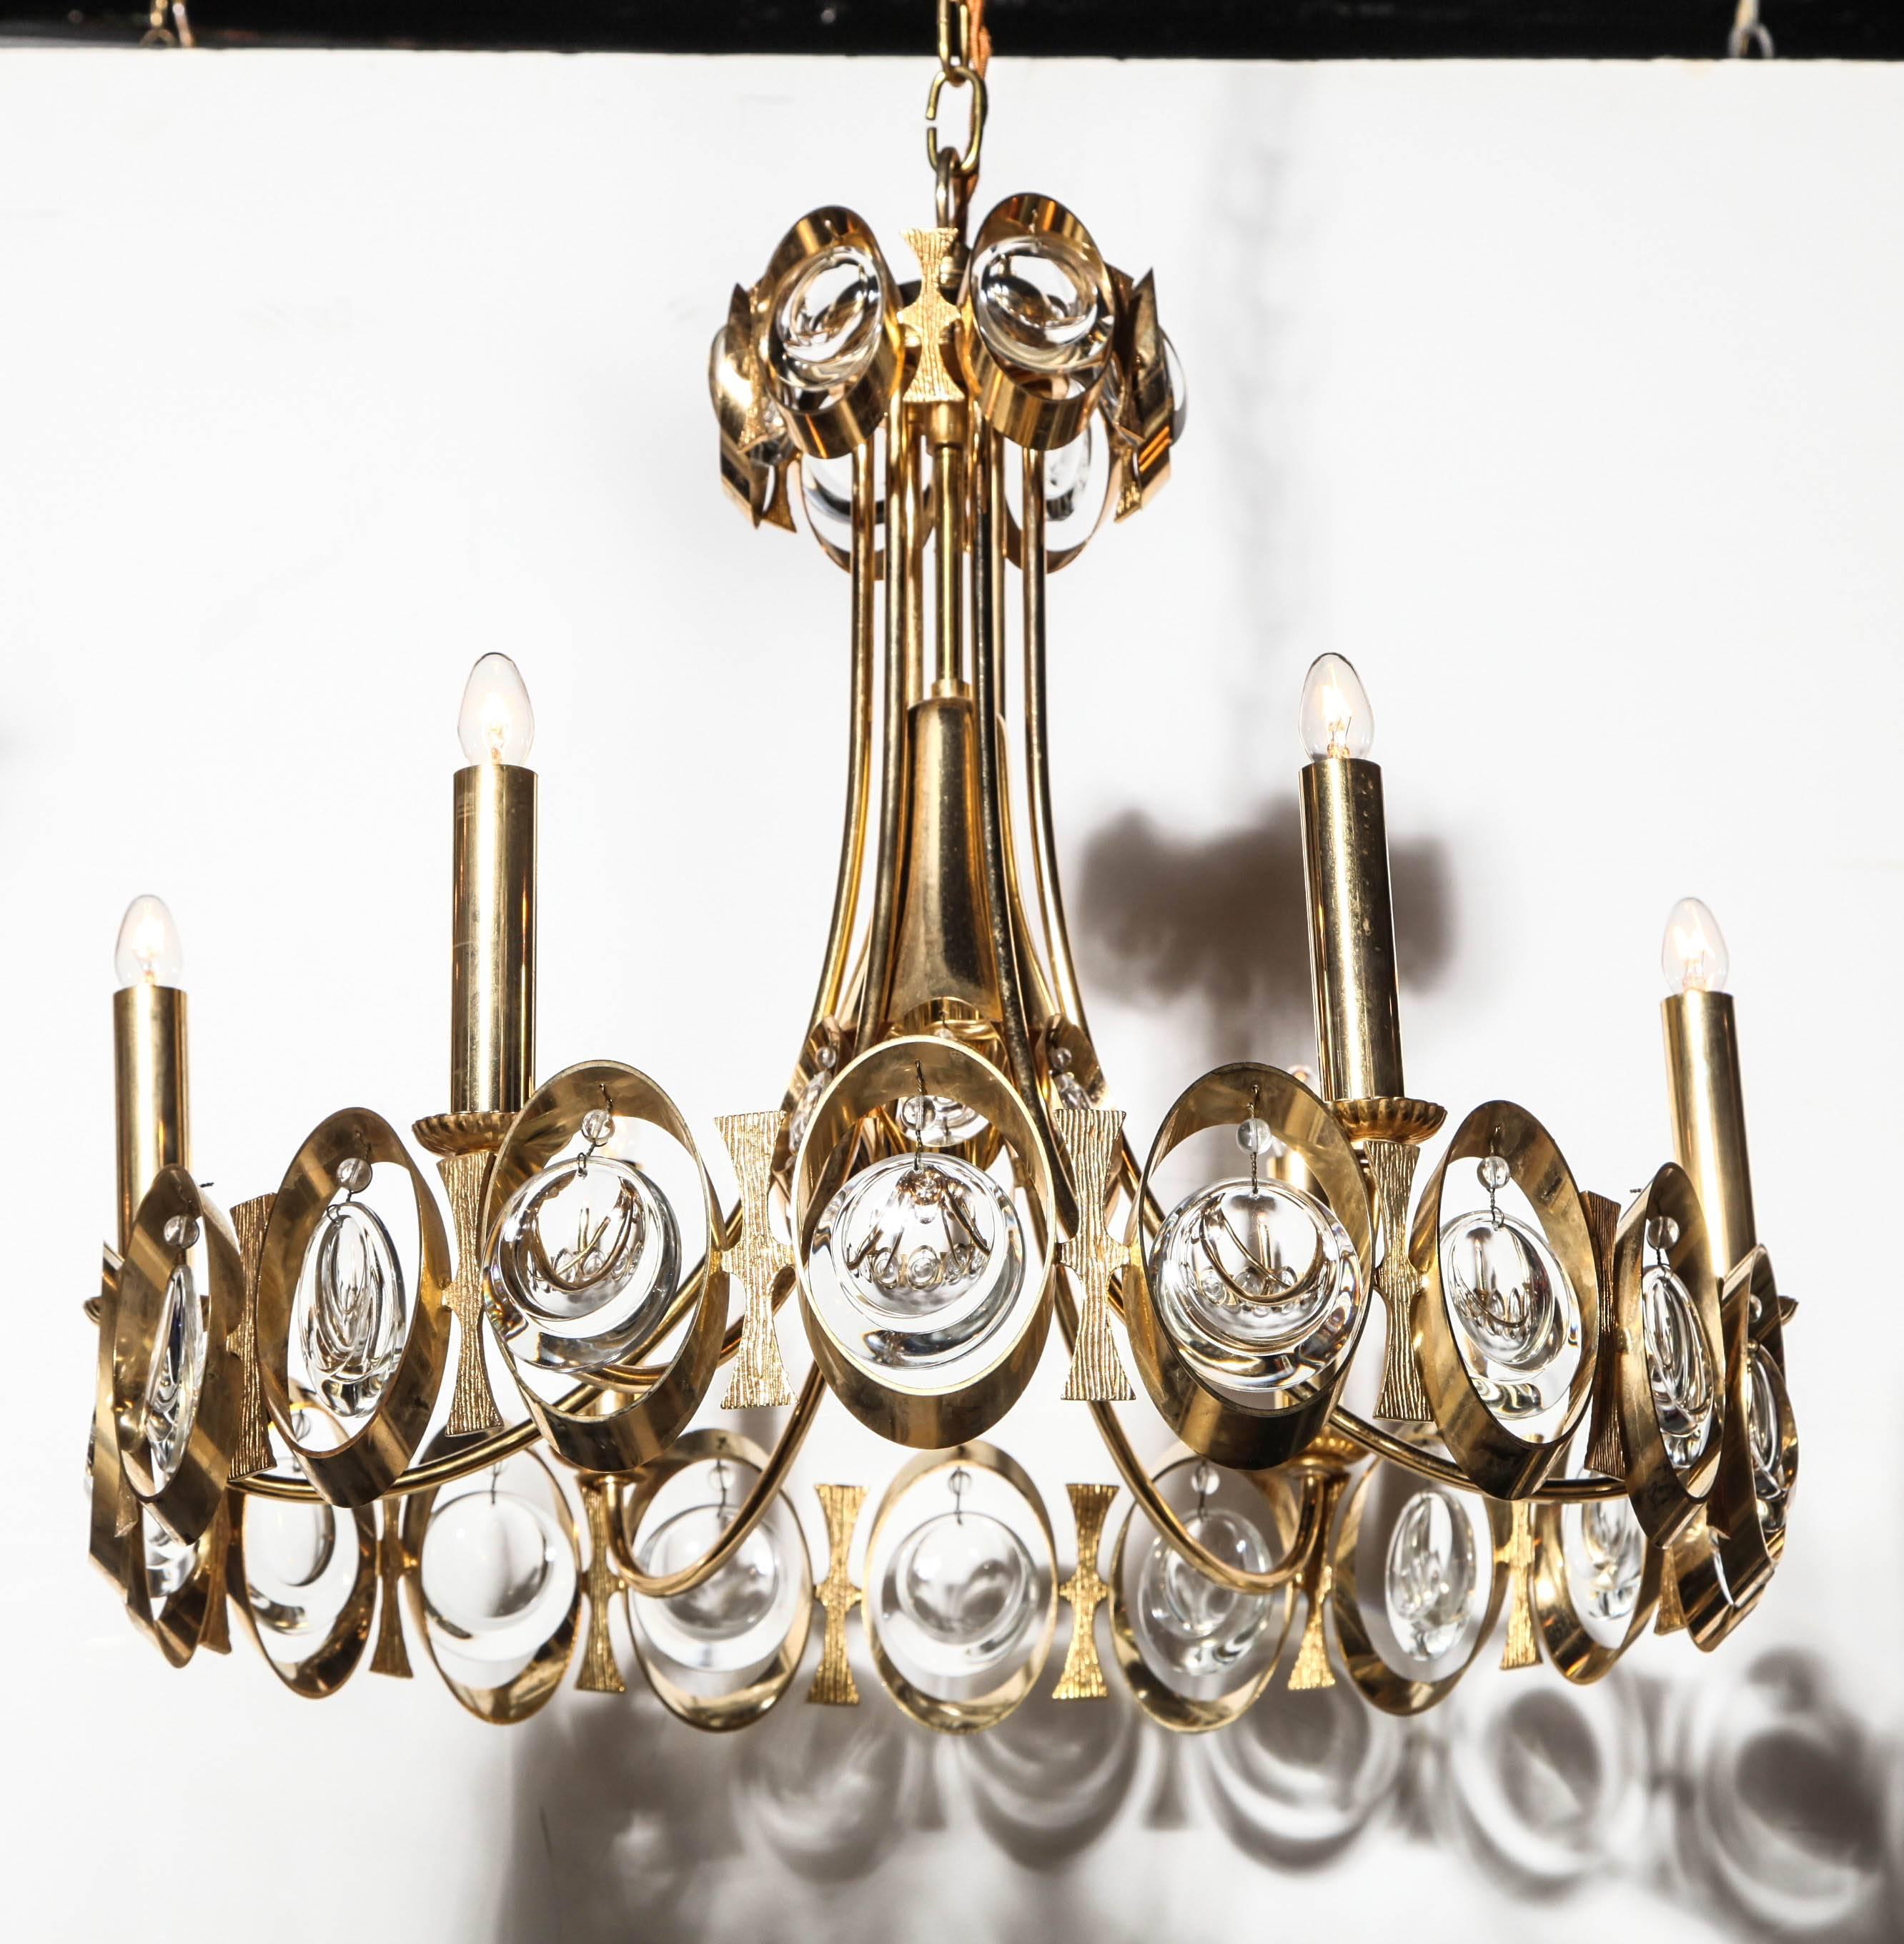 Palwa of Germany gilt brass and austrian clear crystal hanging pendant, 1960s. Featuring a round gilt brass ring with six candlesticks and three levels of hanging shimmering transparent Austrian crystals. Adjustable height. Made in Germany.